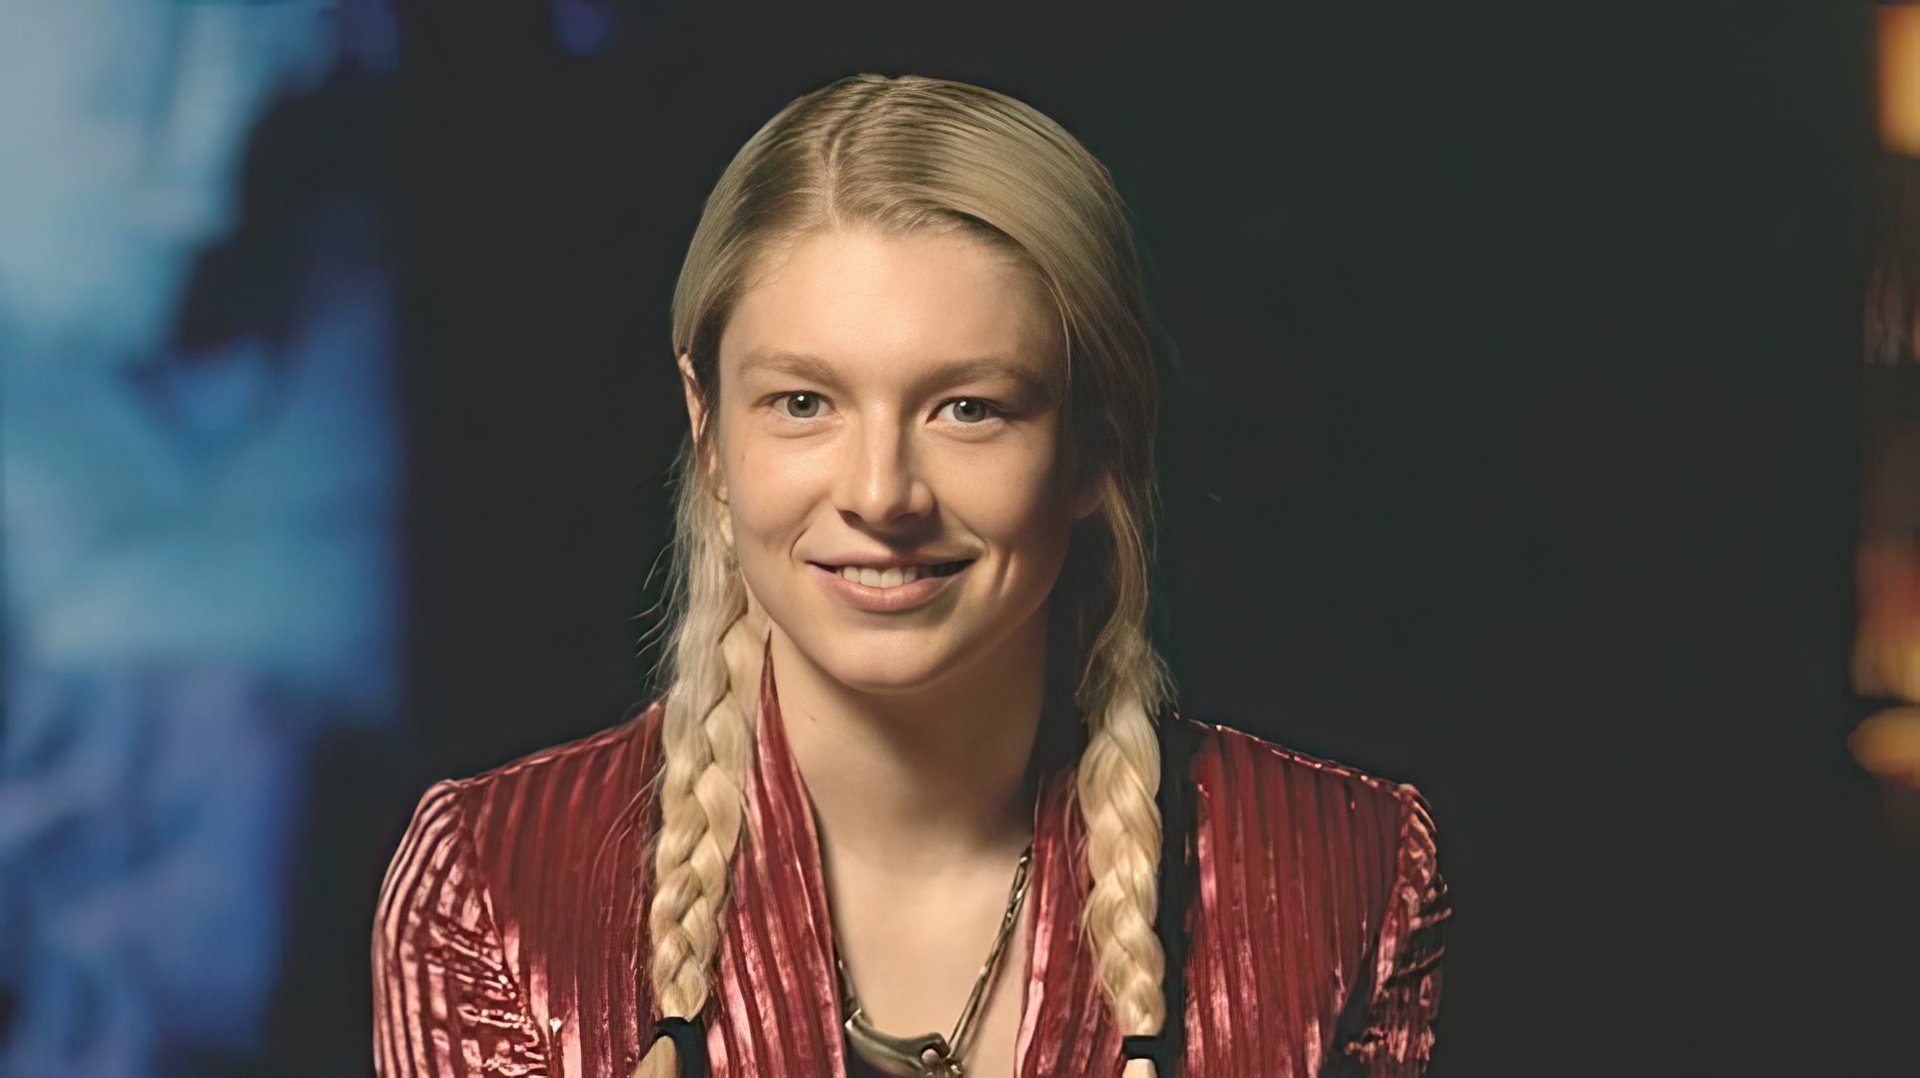 Model and actress Hunter Schafer